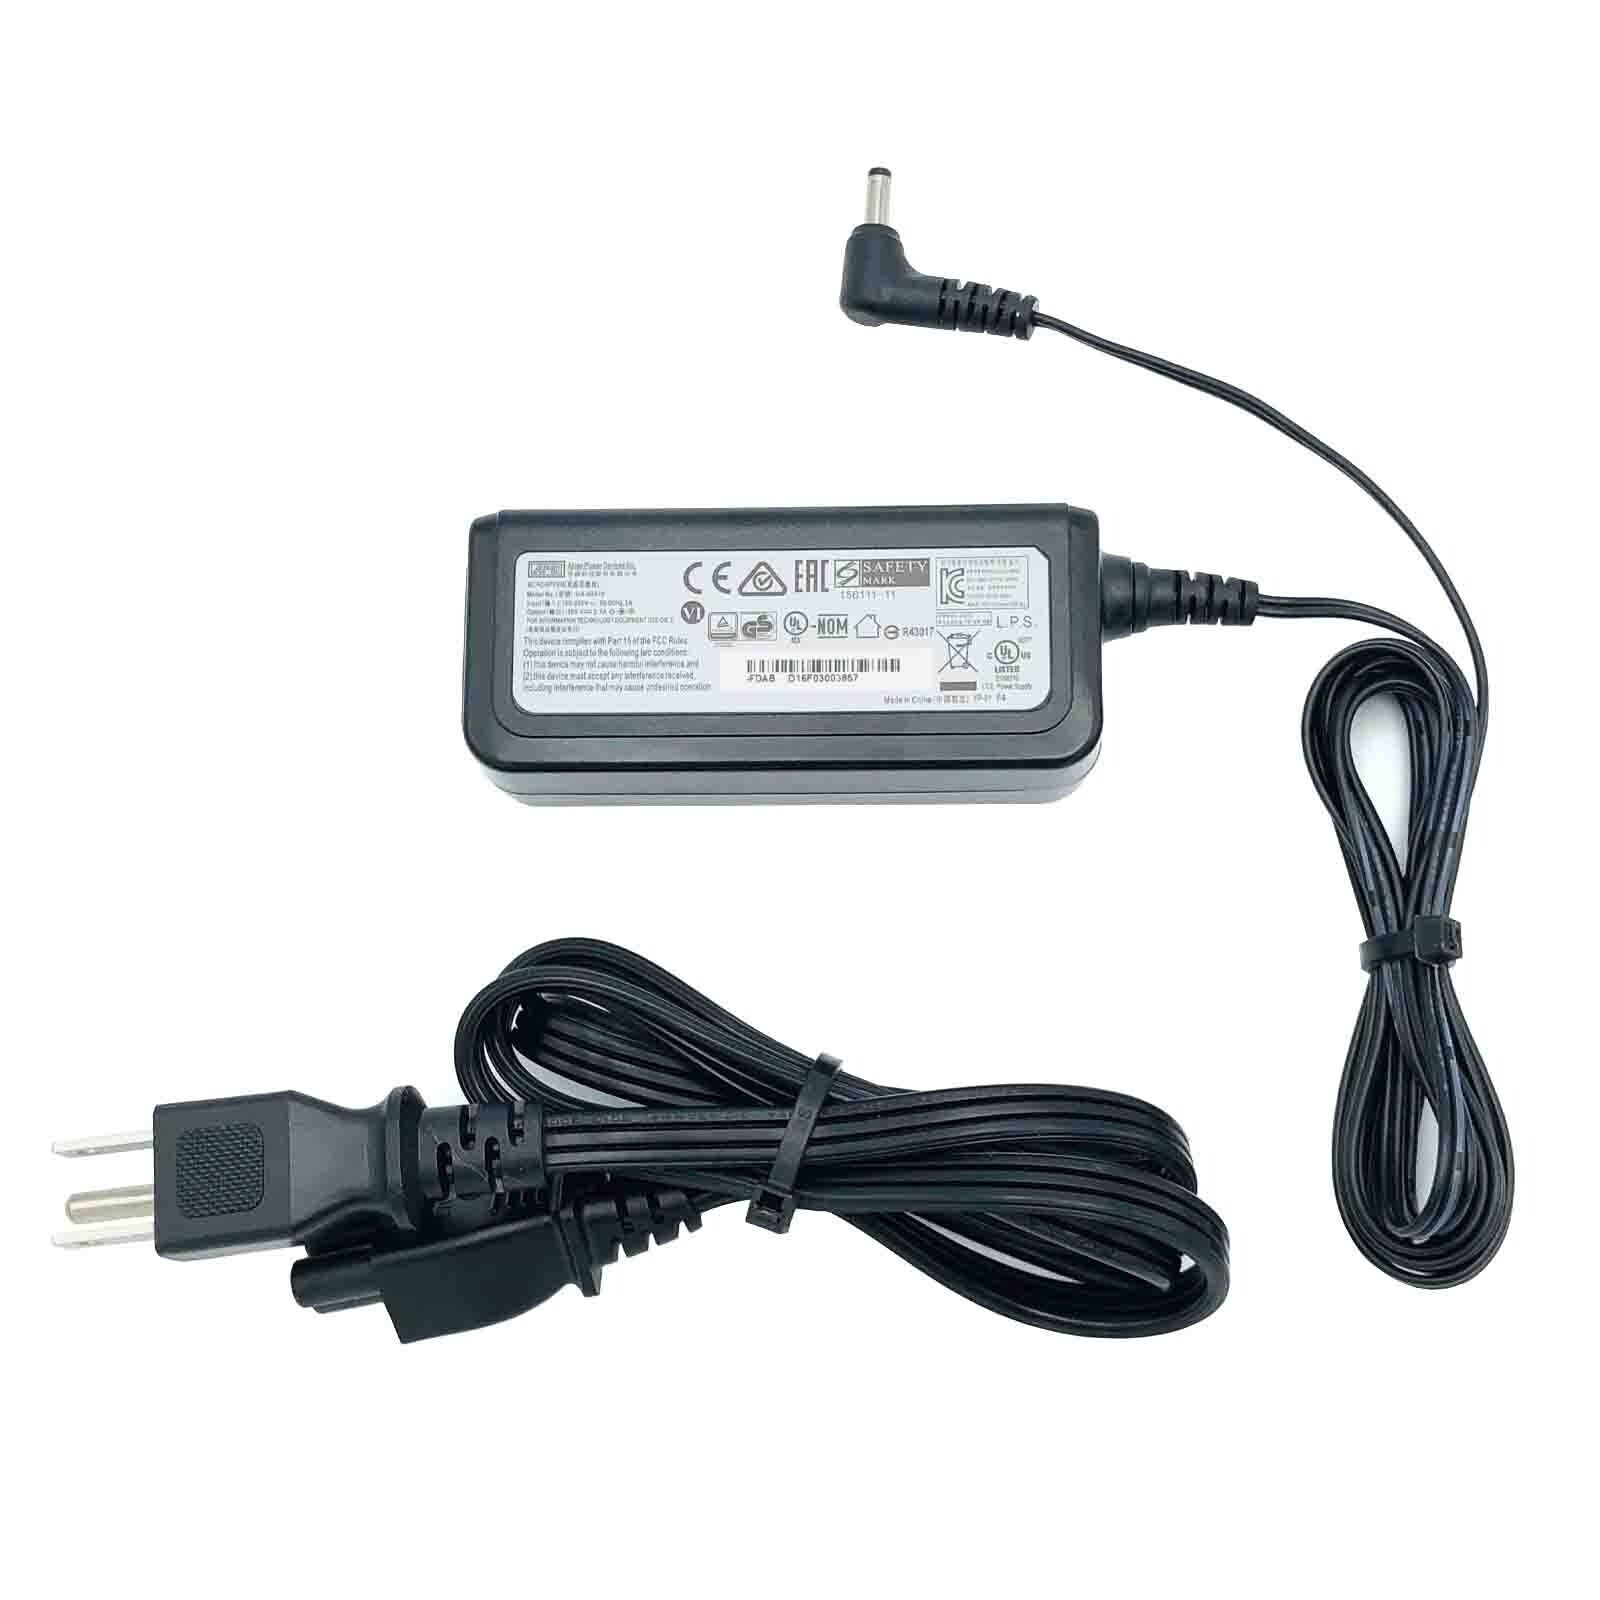 *Brand NEW*Genuine APD ADP-40PH BB Acer Monitor 19V 2.1A 40W AC Adapter Power Supply